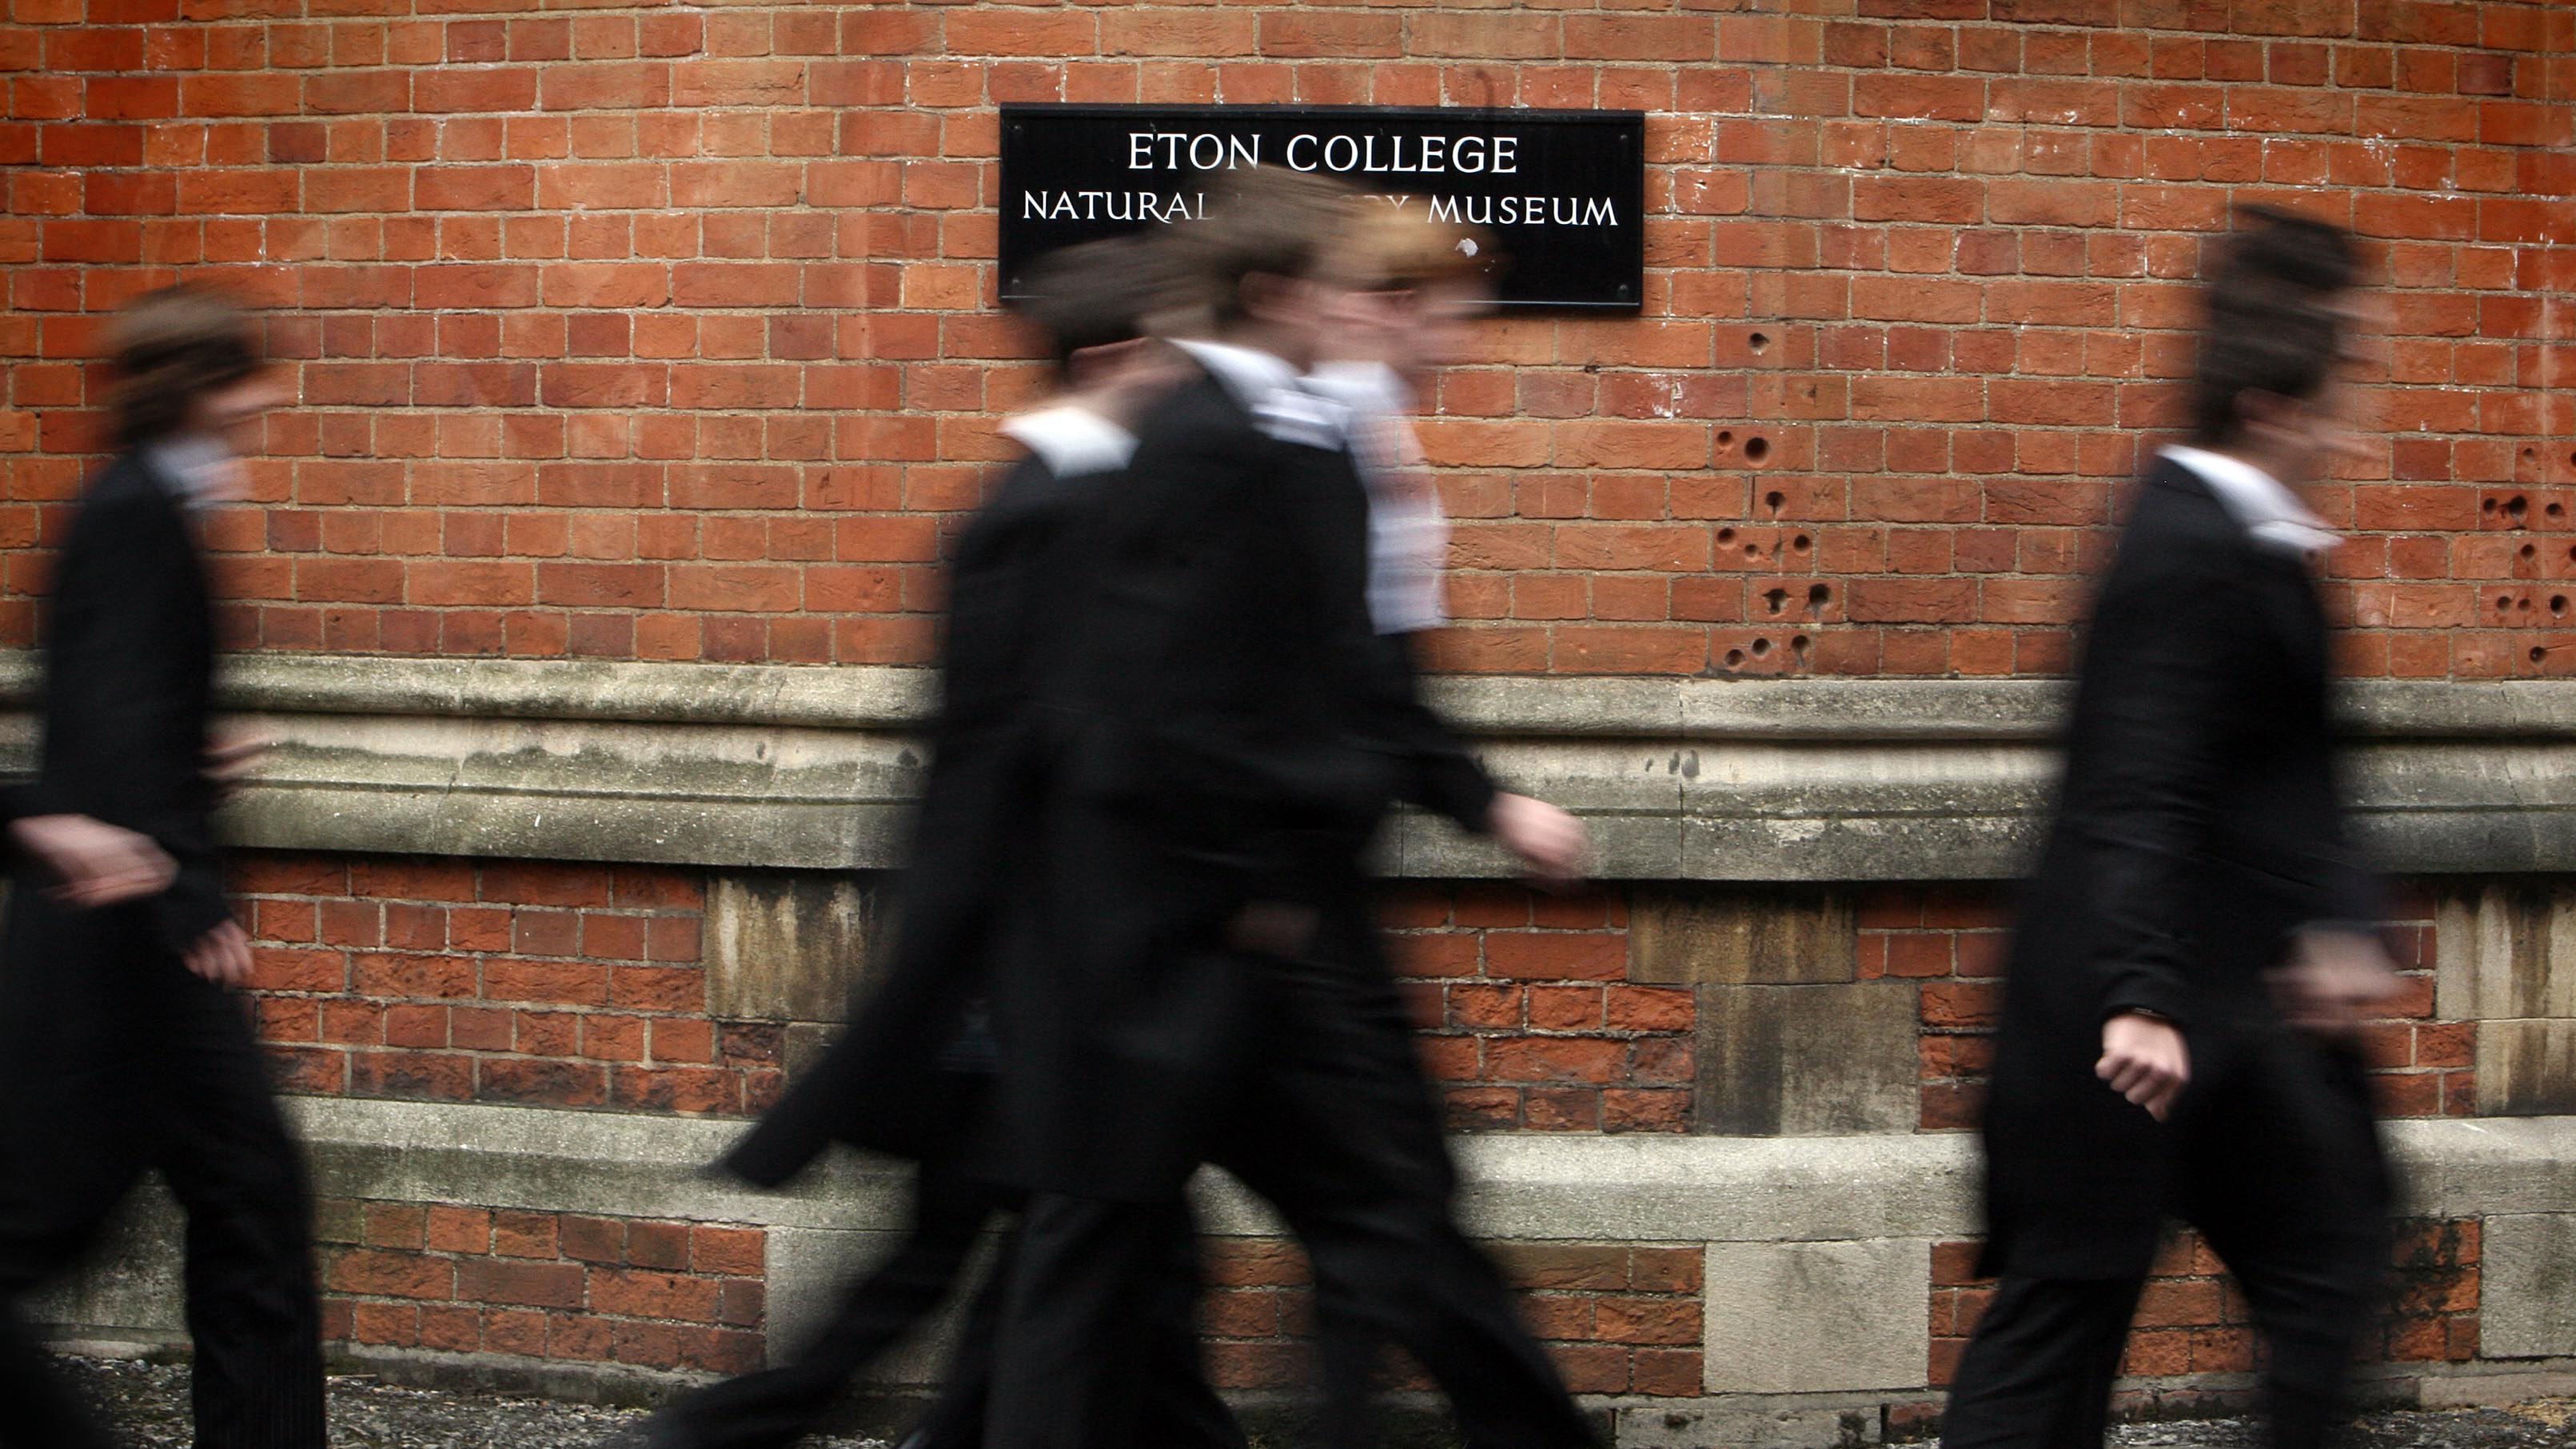 Banning private schools isn’t the way to solve inequality